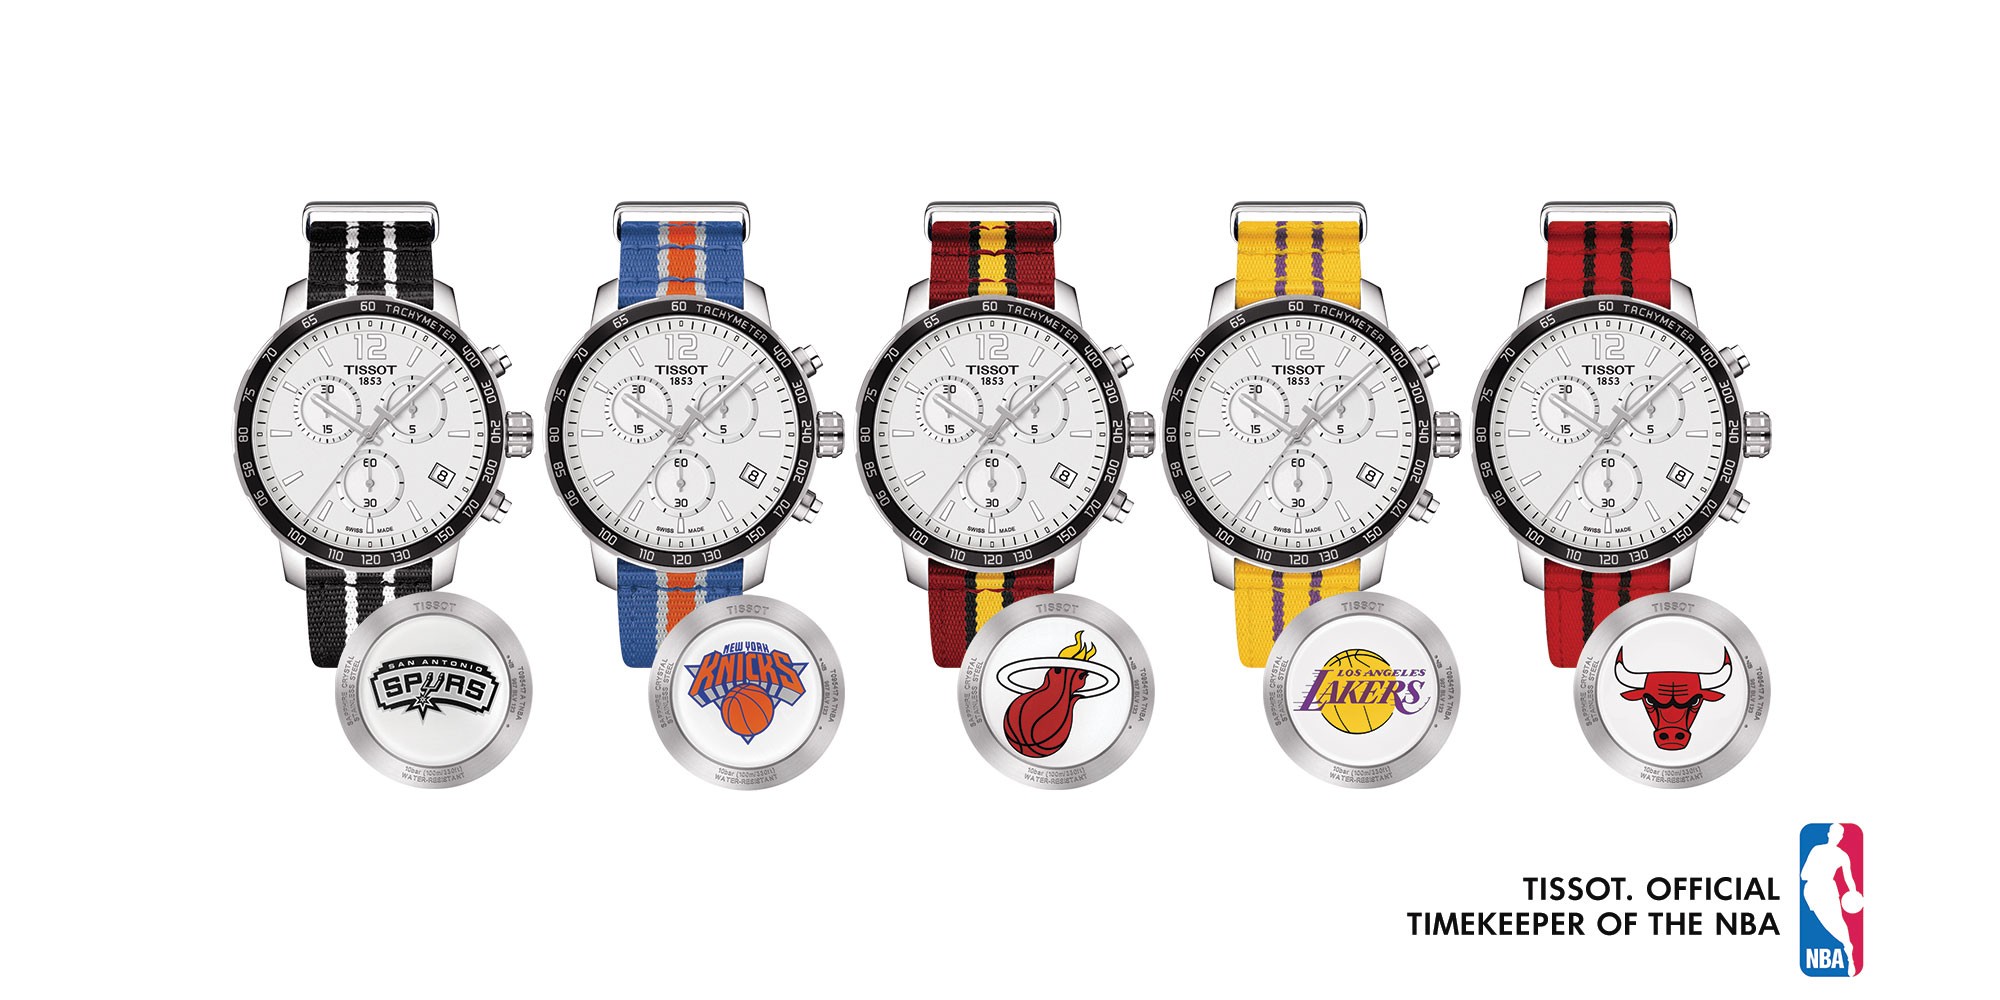 Tissot Official Timekeeper of the NBA